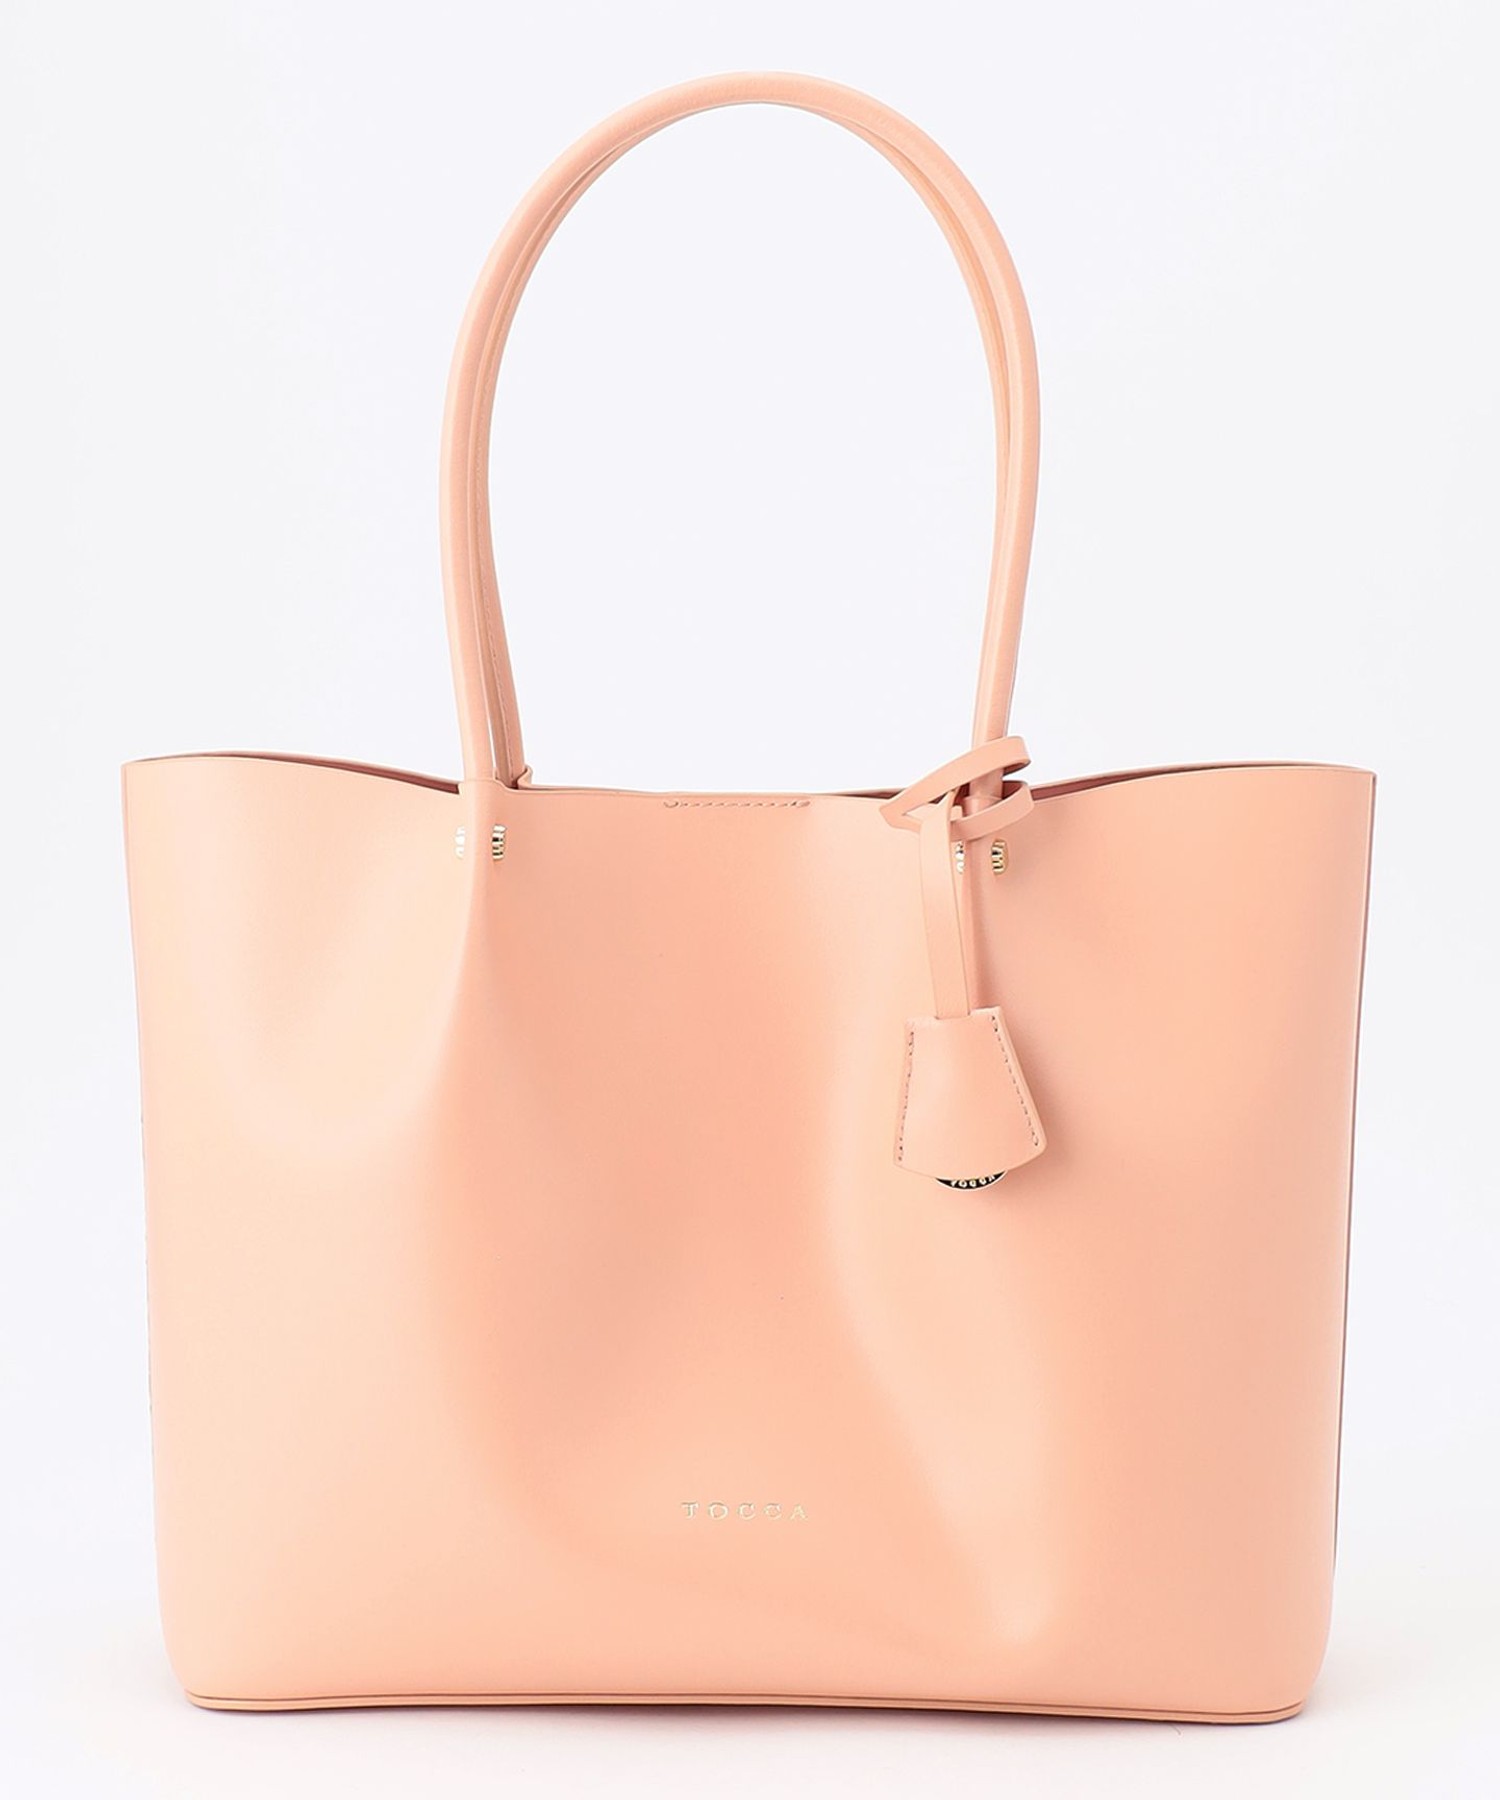 TOCCABLOOM LEATHER 【本日特価】 TOTE 毎日がバーゲンセール L レザートートバッグ